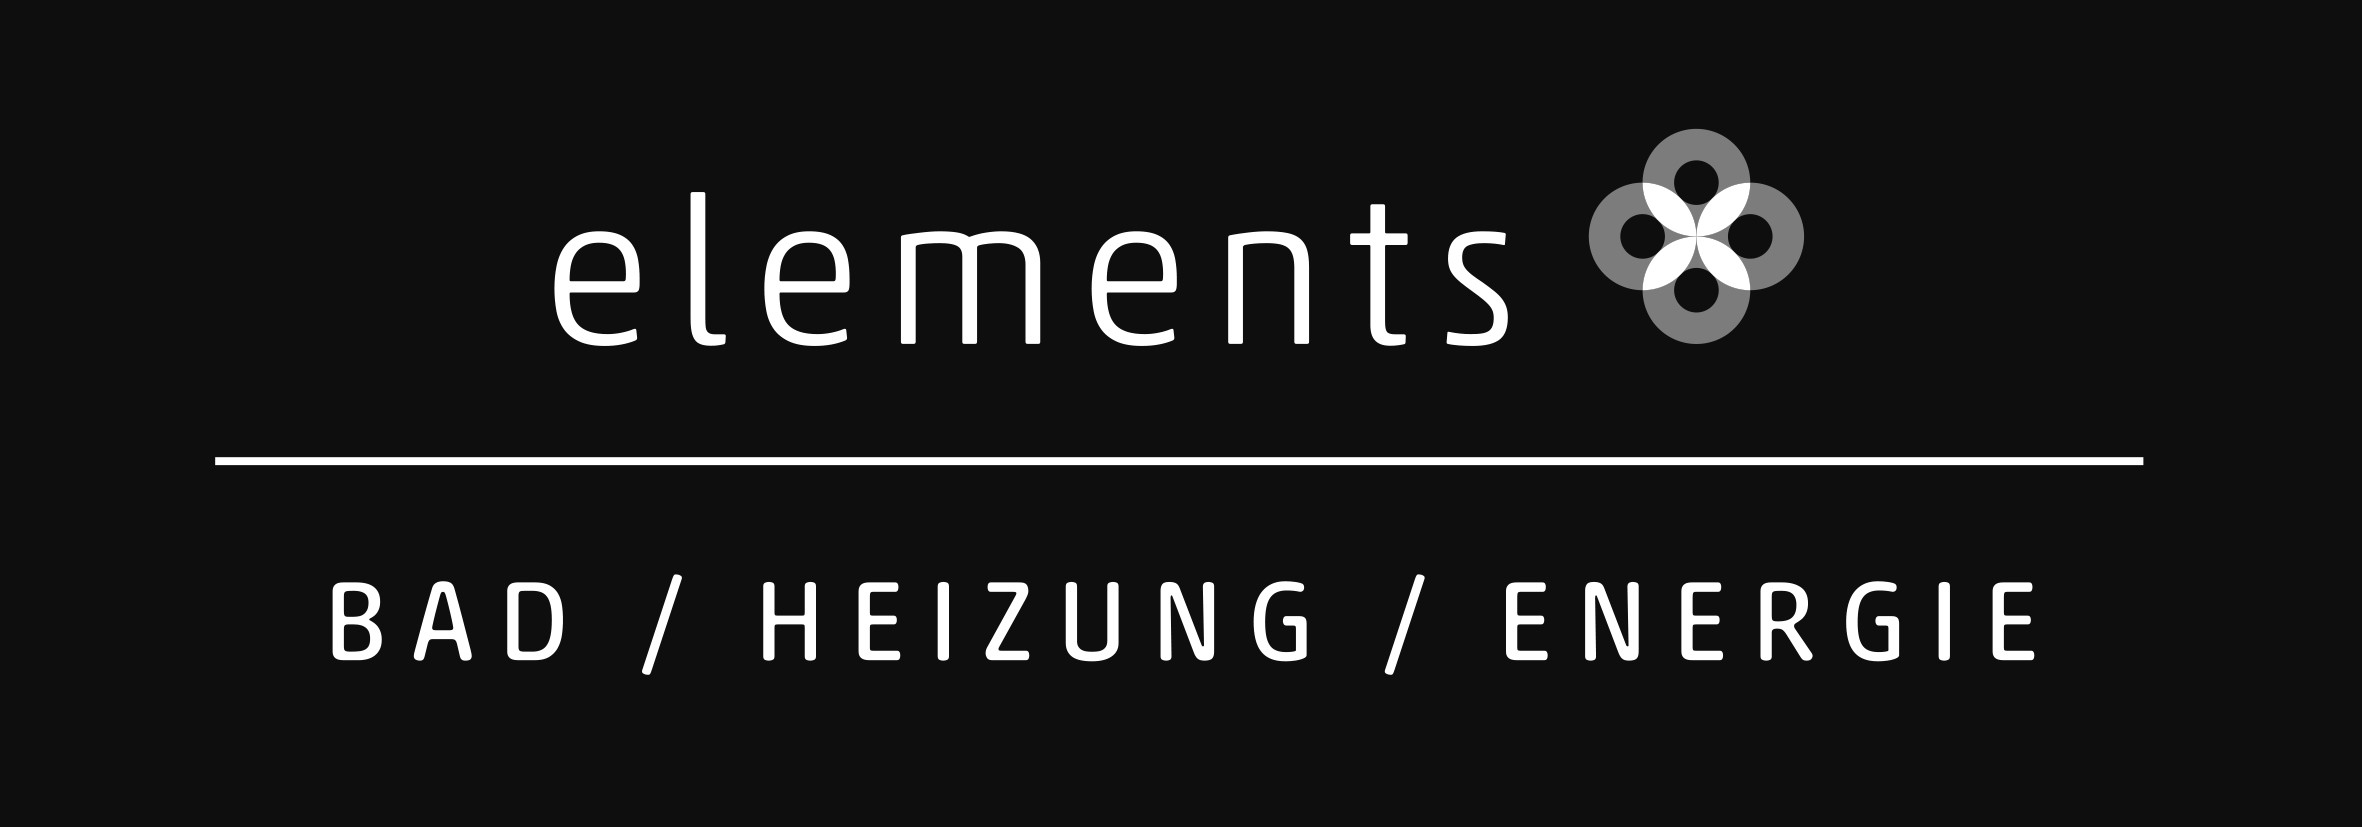 elements - Bad / Heizung / Energie